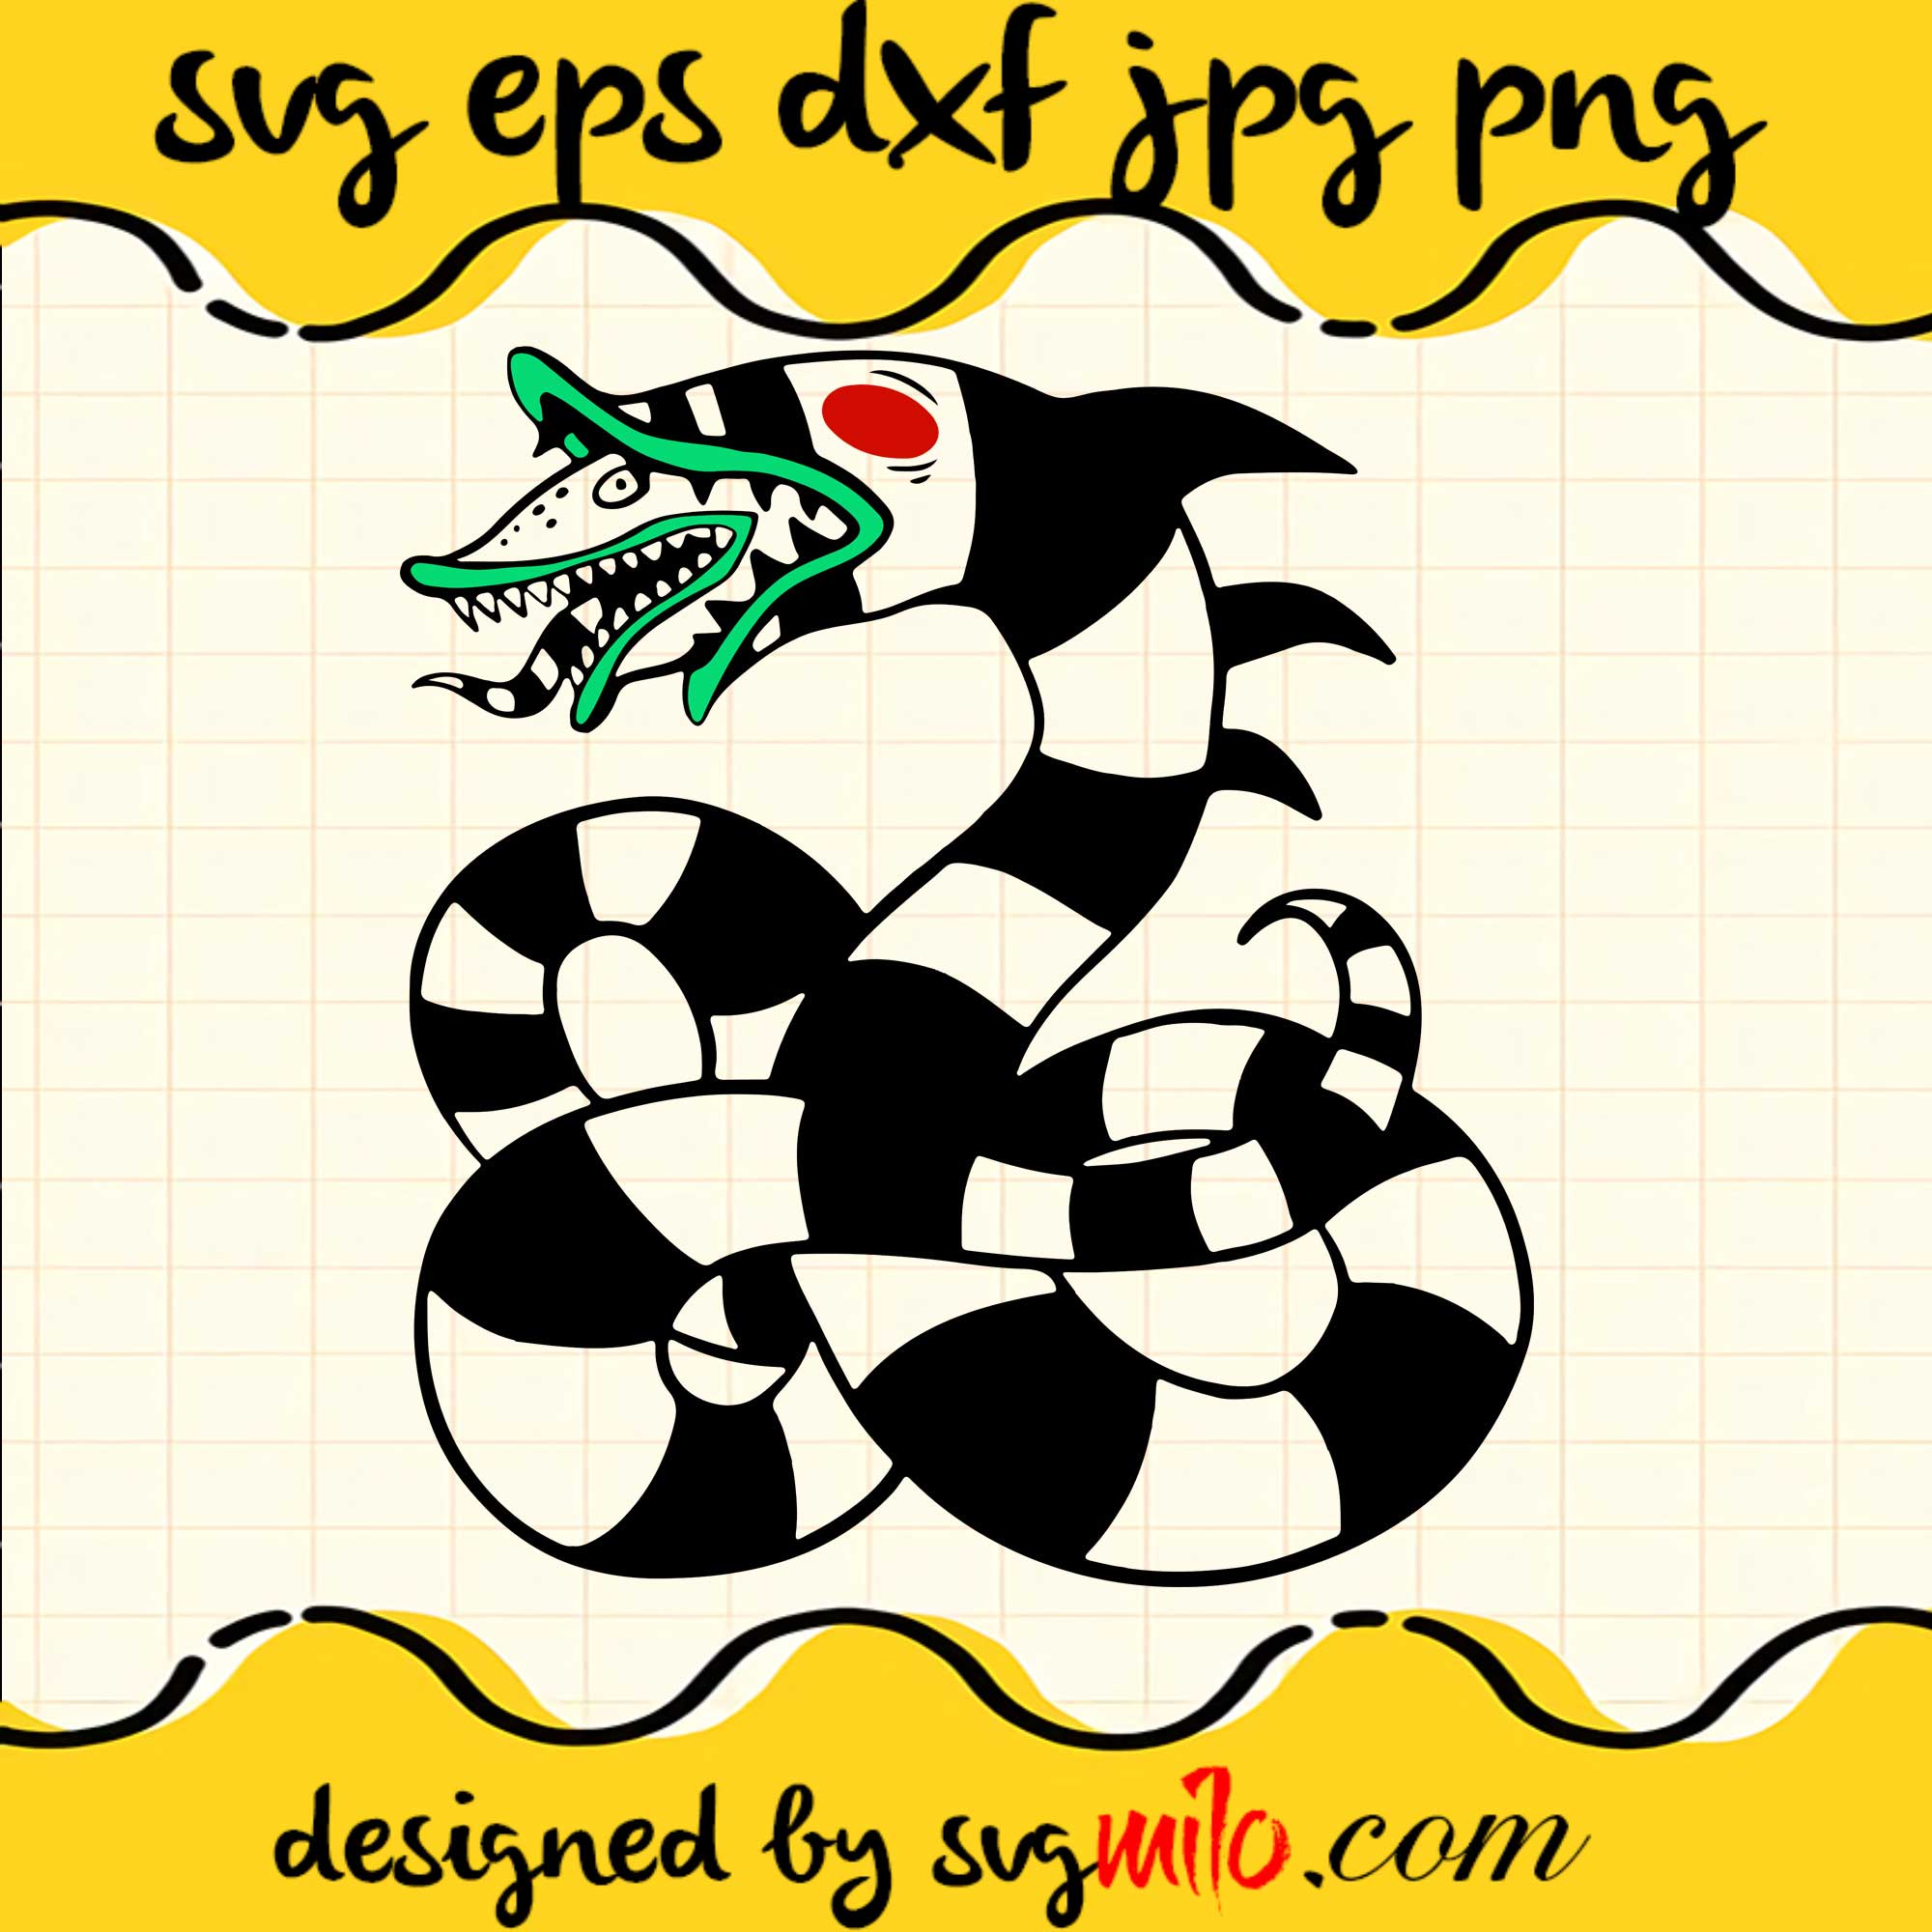 snake Archives - Store Free SVG Download